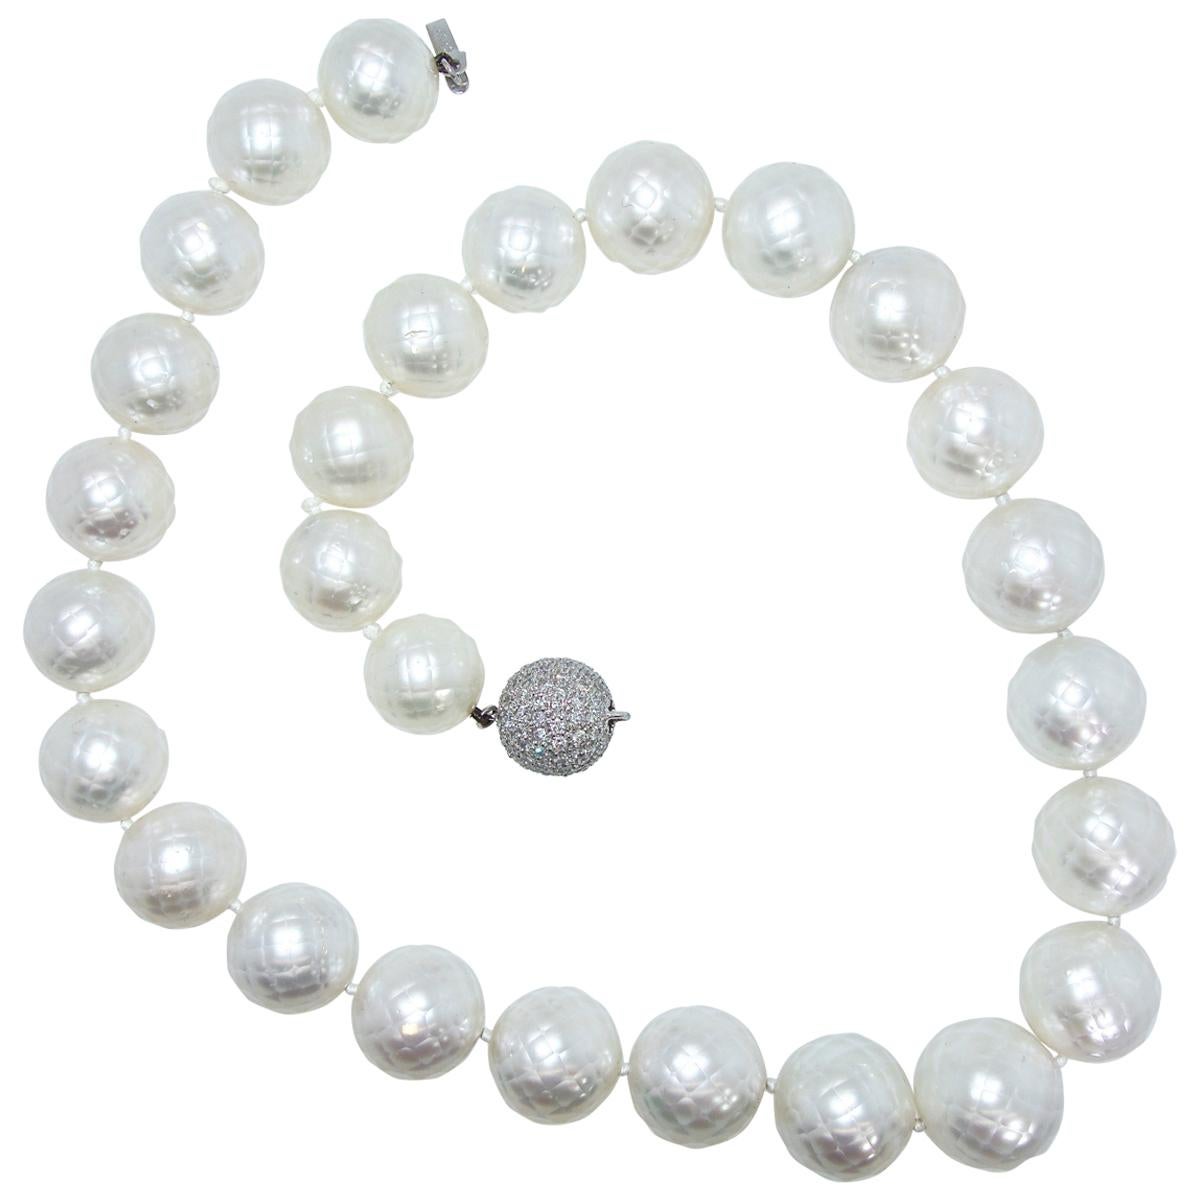 Faceted South Sea Pearls, Unusual and Distinctive with a Diamond Last